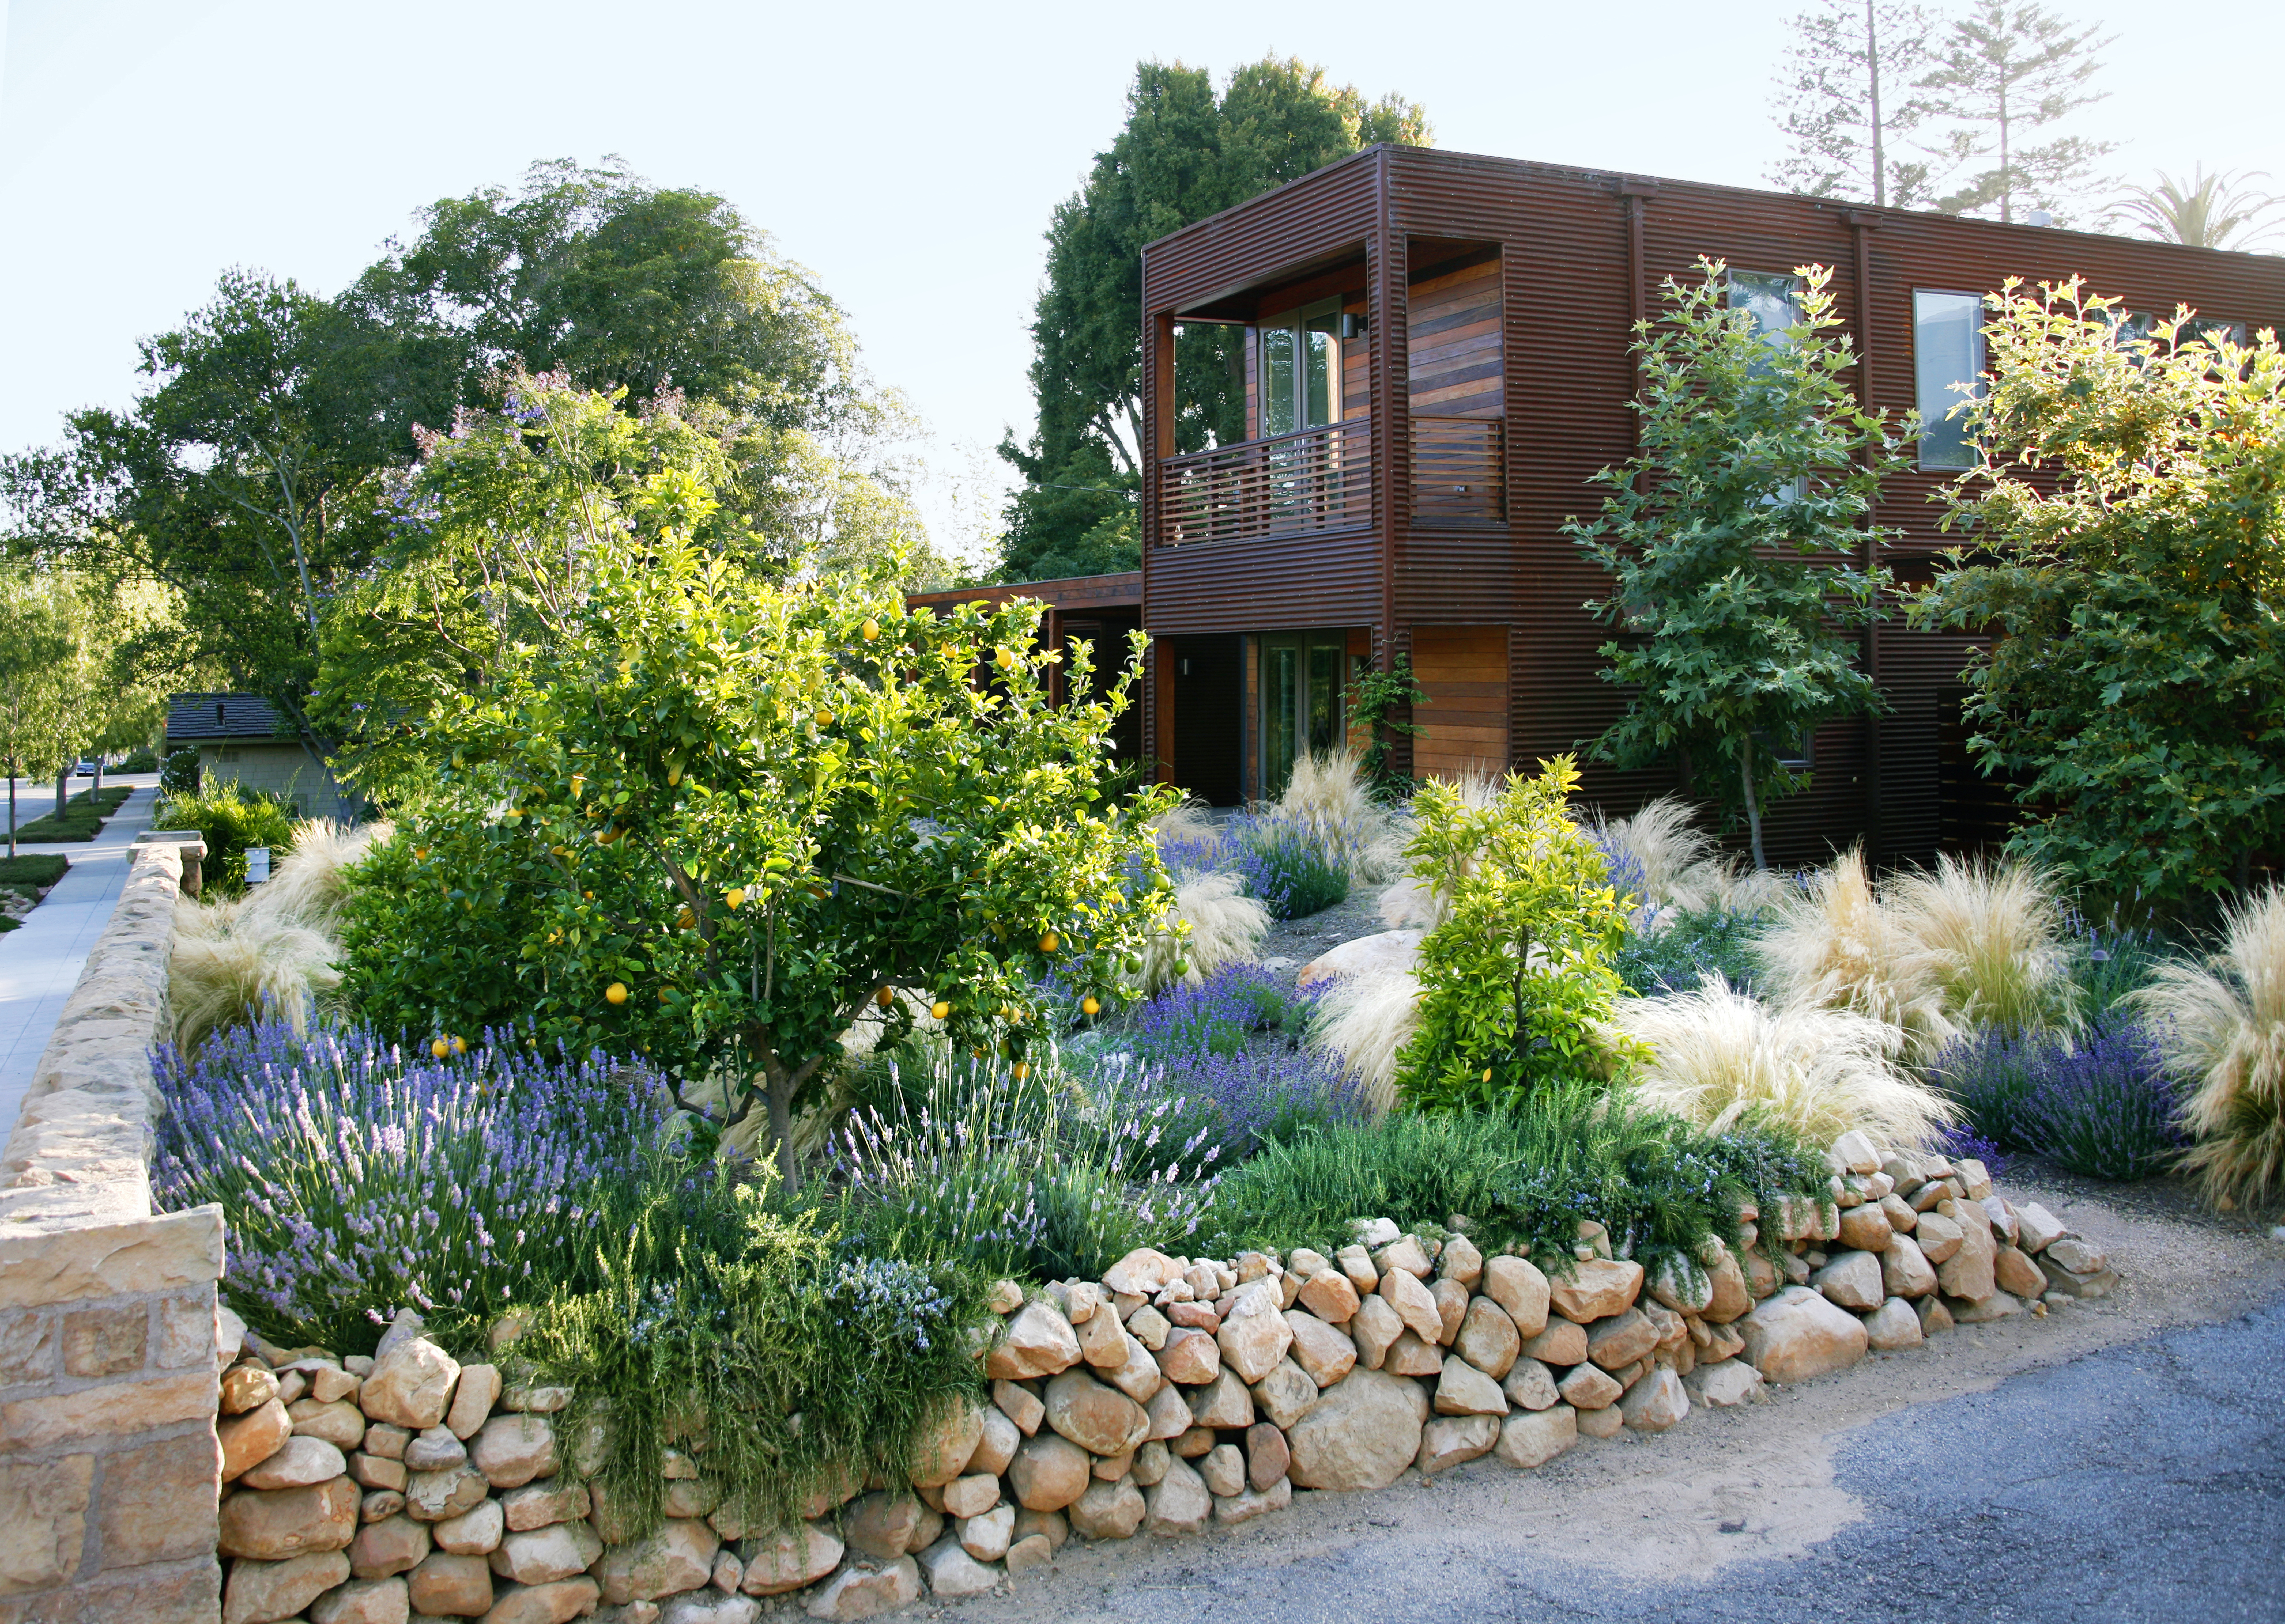 Designing With Drought Resistant Plants, Drought Tolerant Landscaping